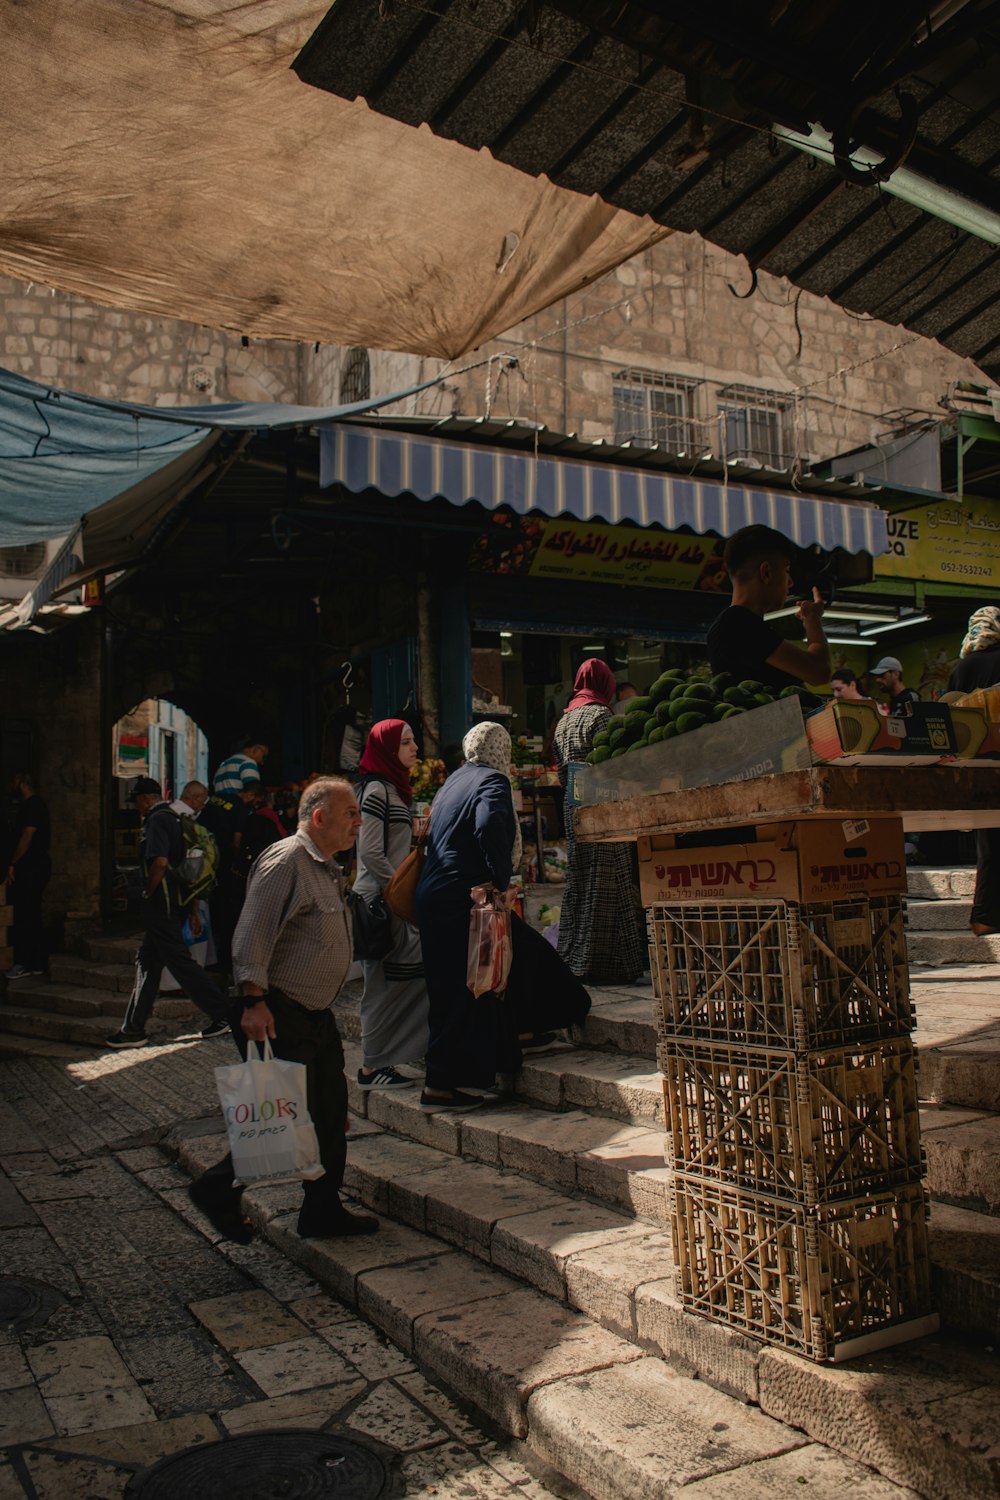 a group of people walking around a market